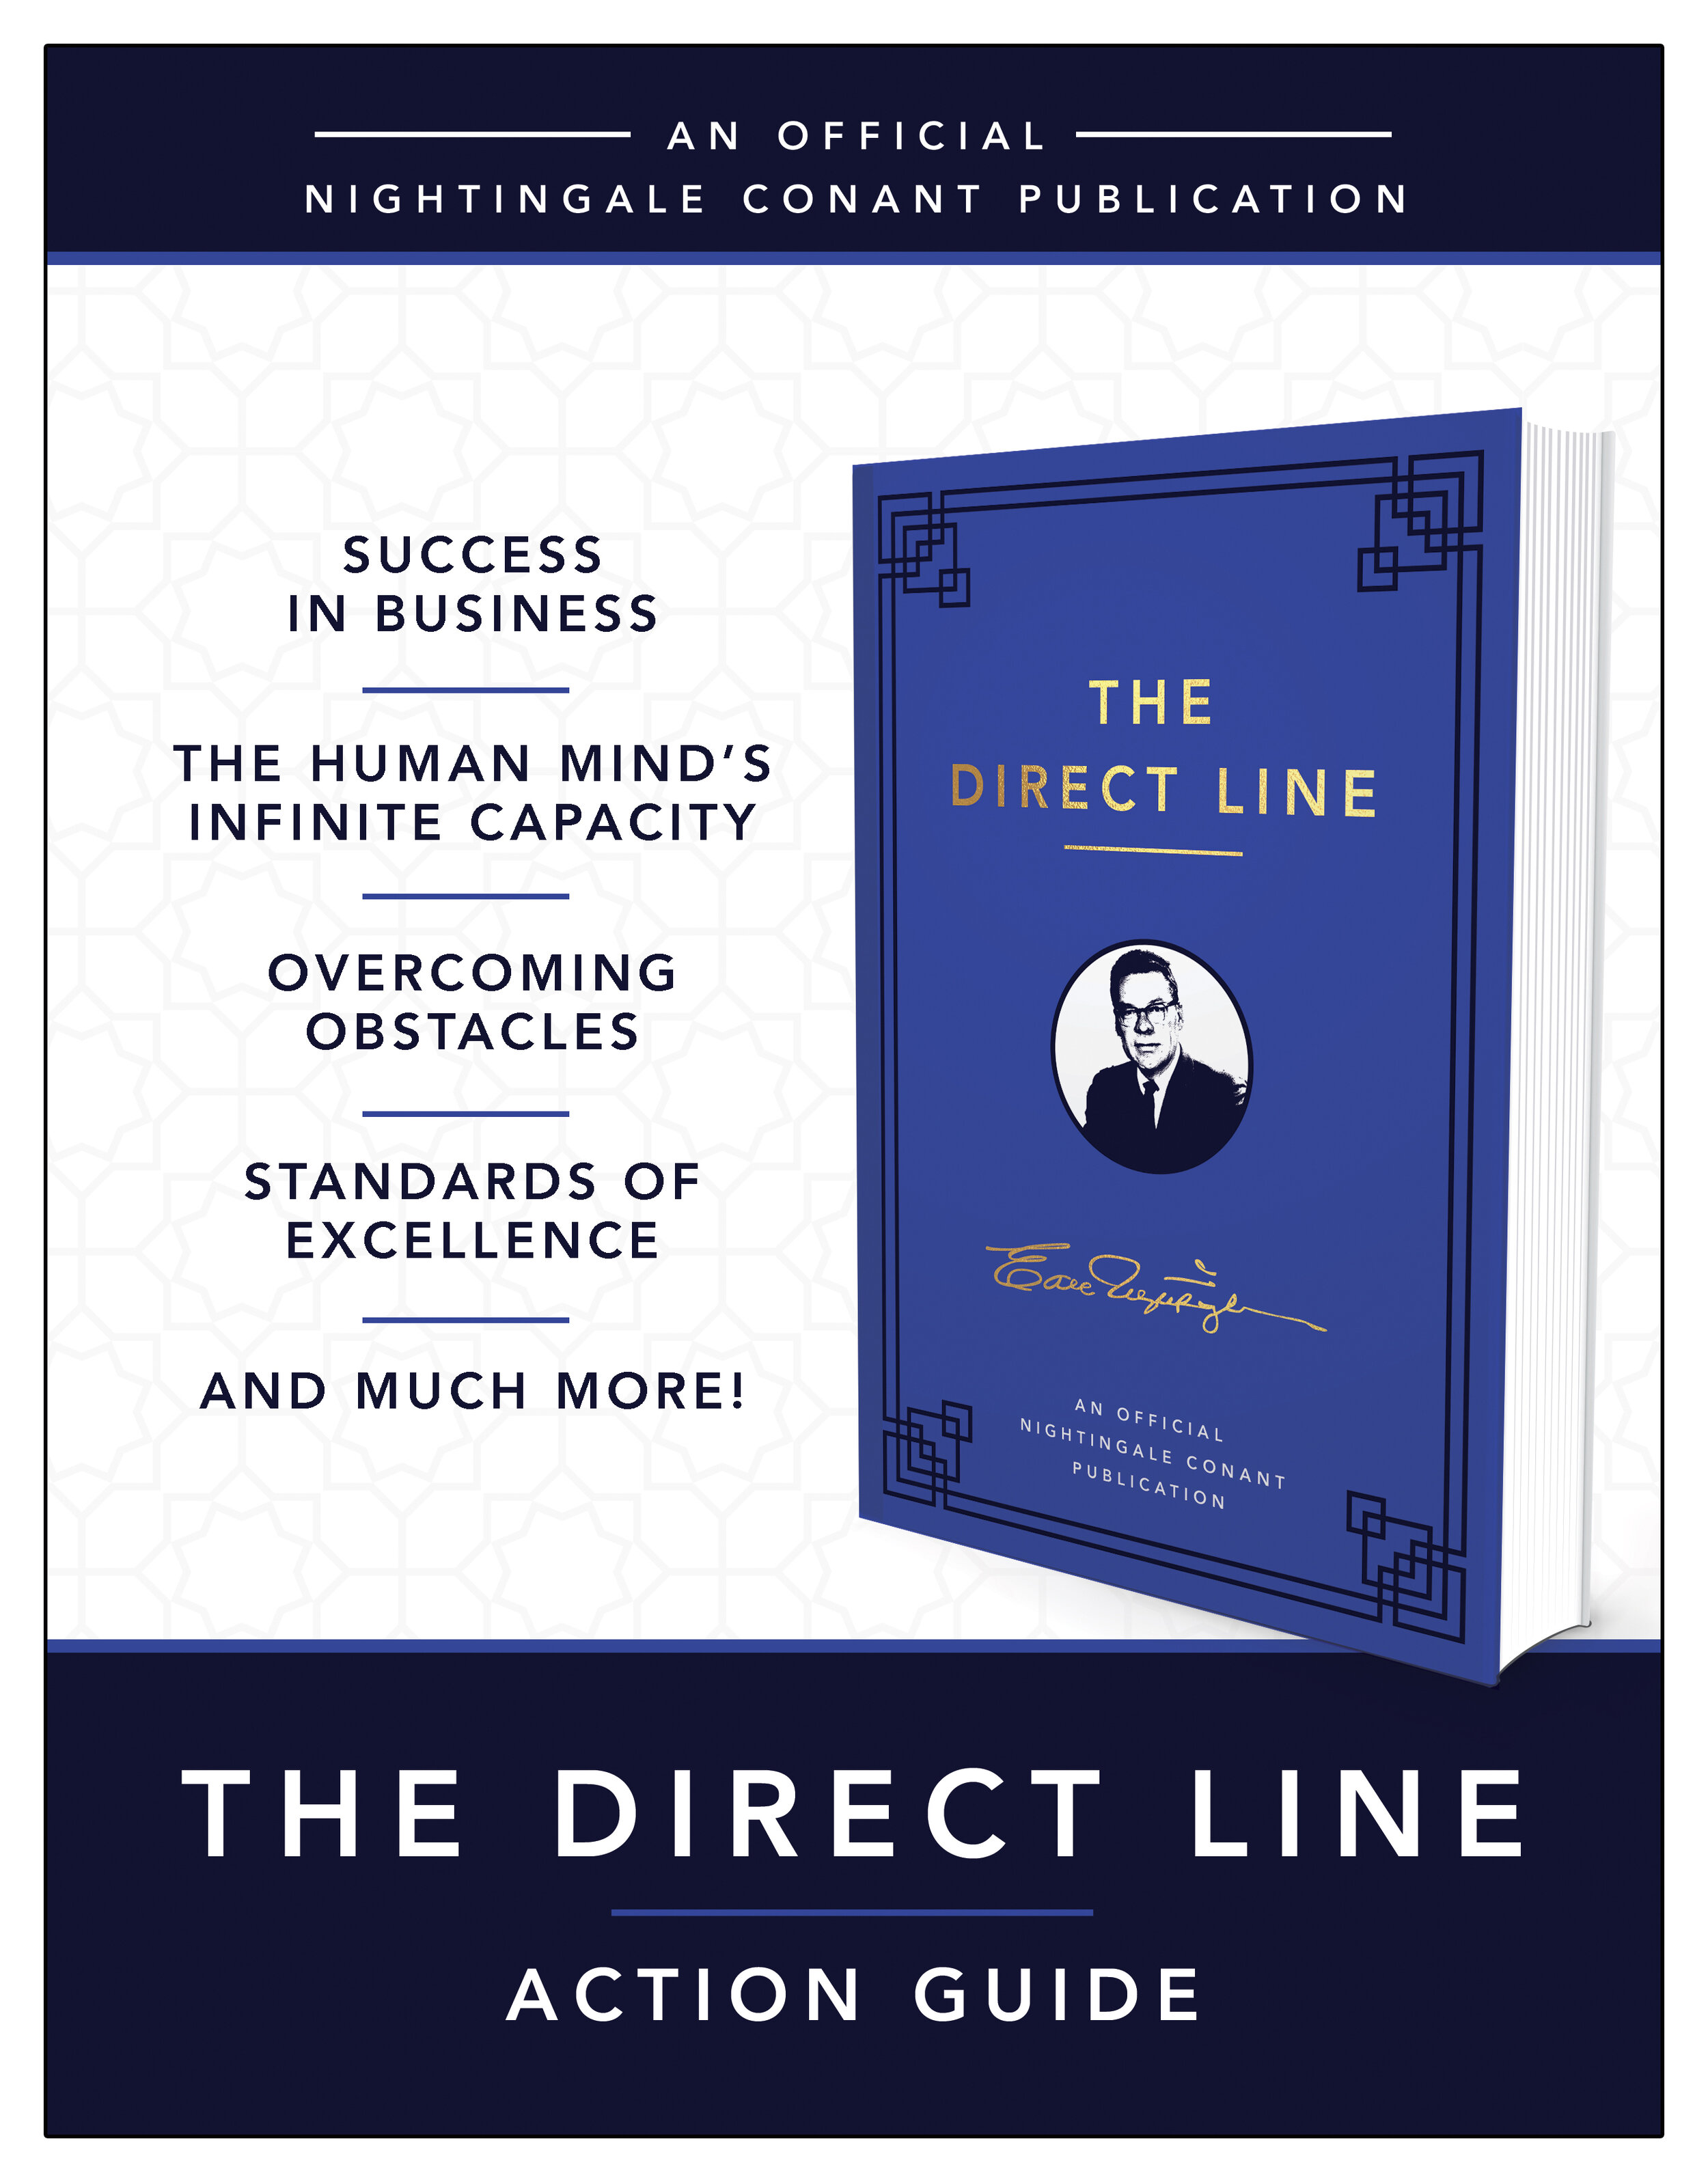 The_Direct_Line_Action_Guide.jpg